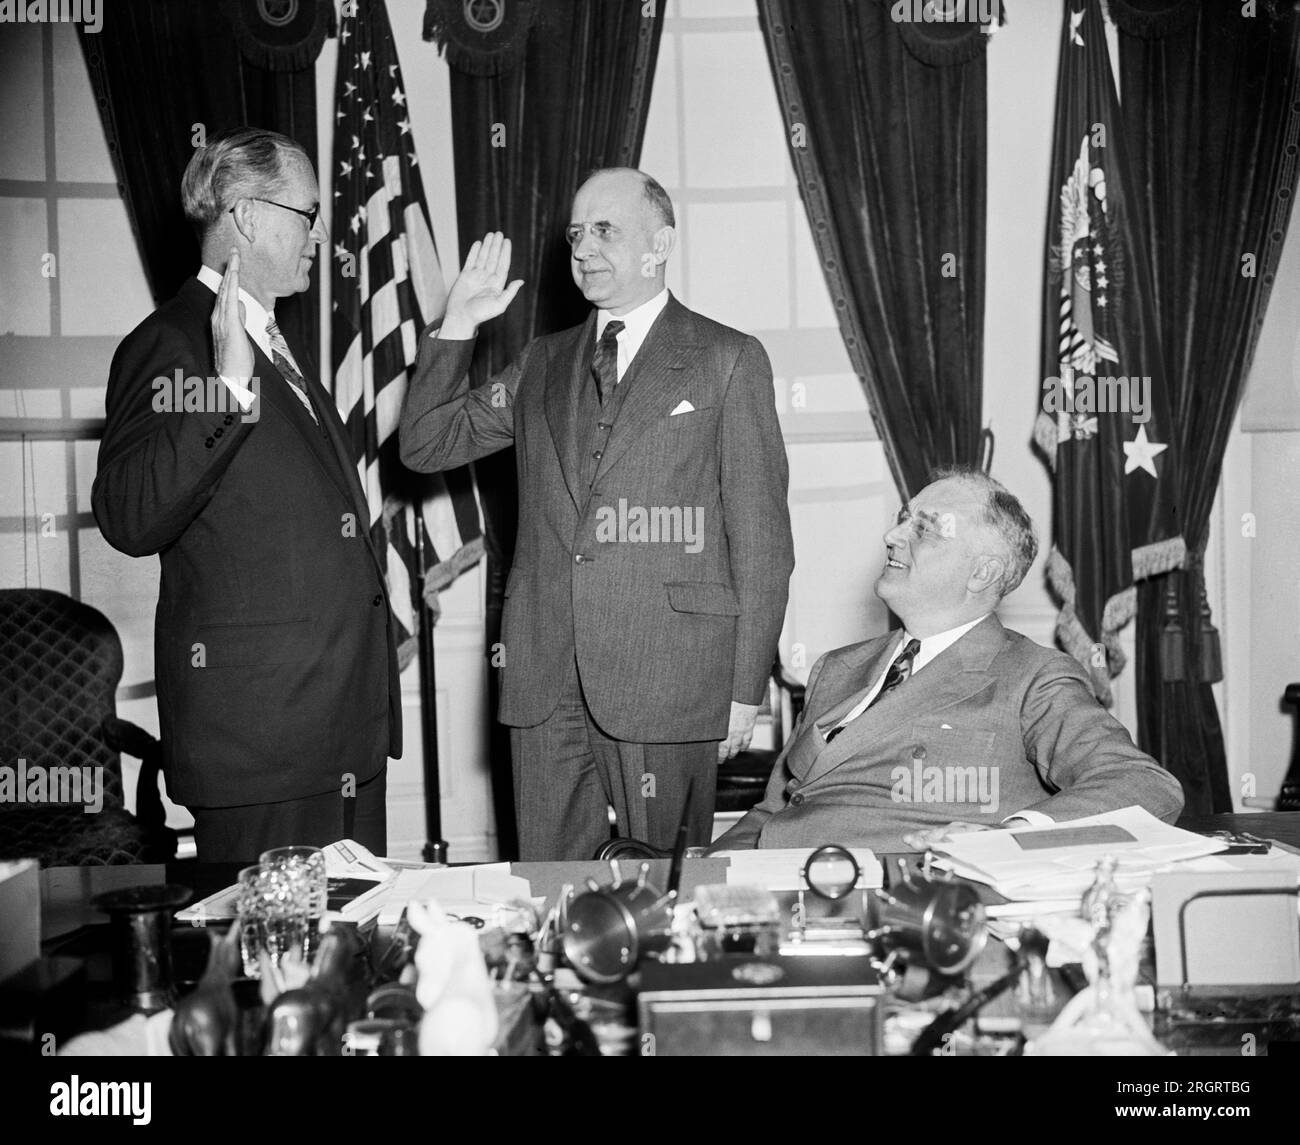 Washington, D.C.:  February 18, 1938 President Roosevelt looks on as Joseph P. Kennedy takes the oath from Supreme Court Associate Justice Stanley Reed as the new U.S. envoy to Great Britain. Stock Photo